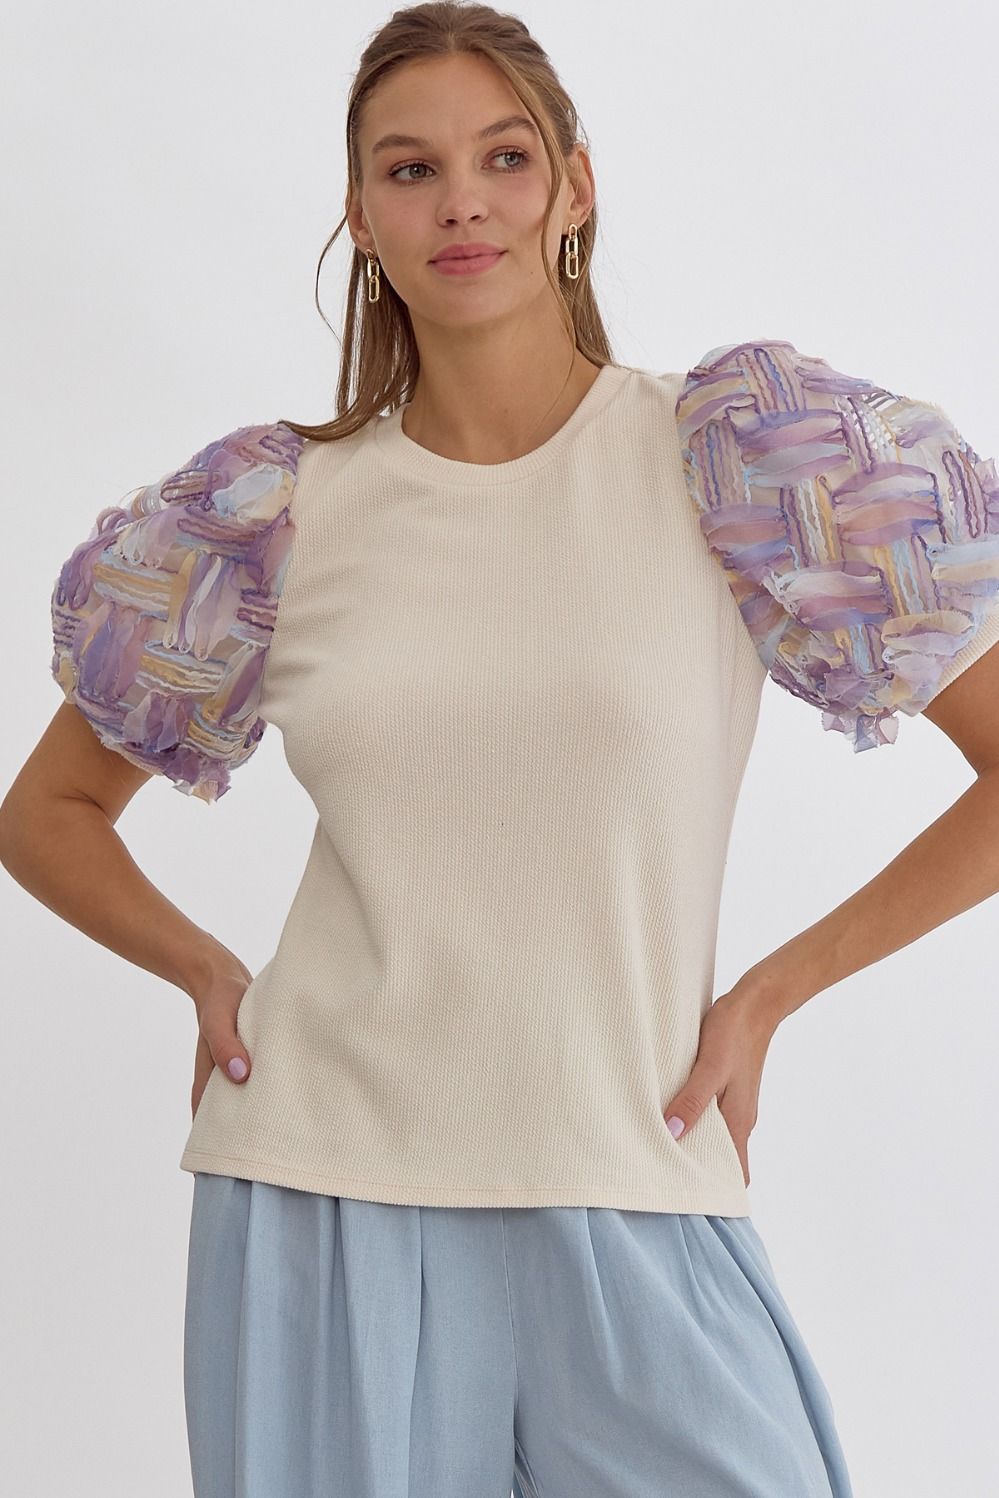 Entro Textured cream blouse with abstract 3d design puff sleeves